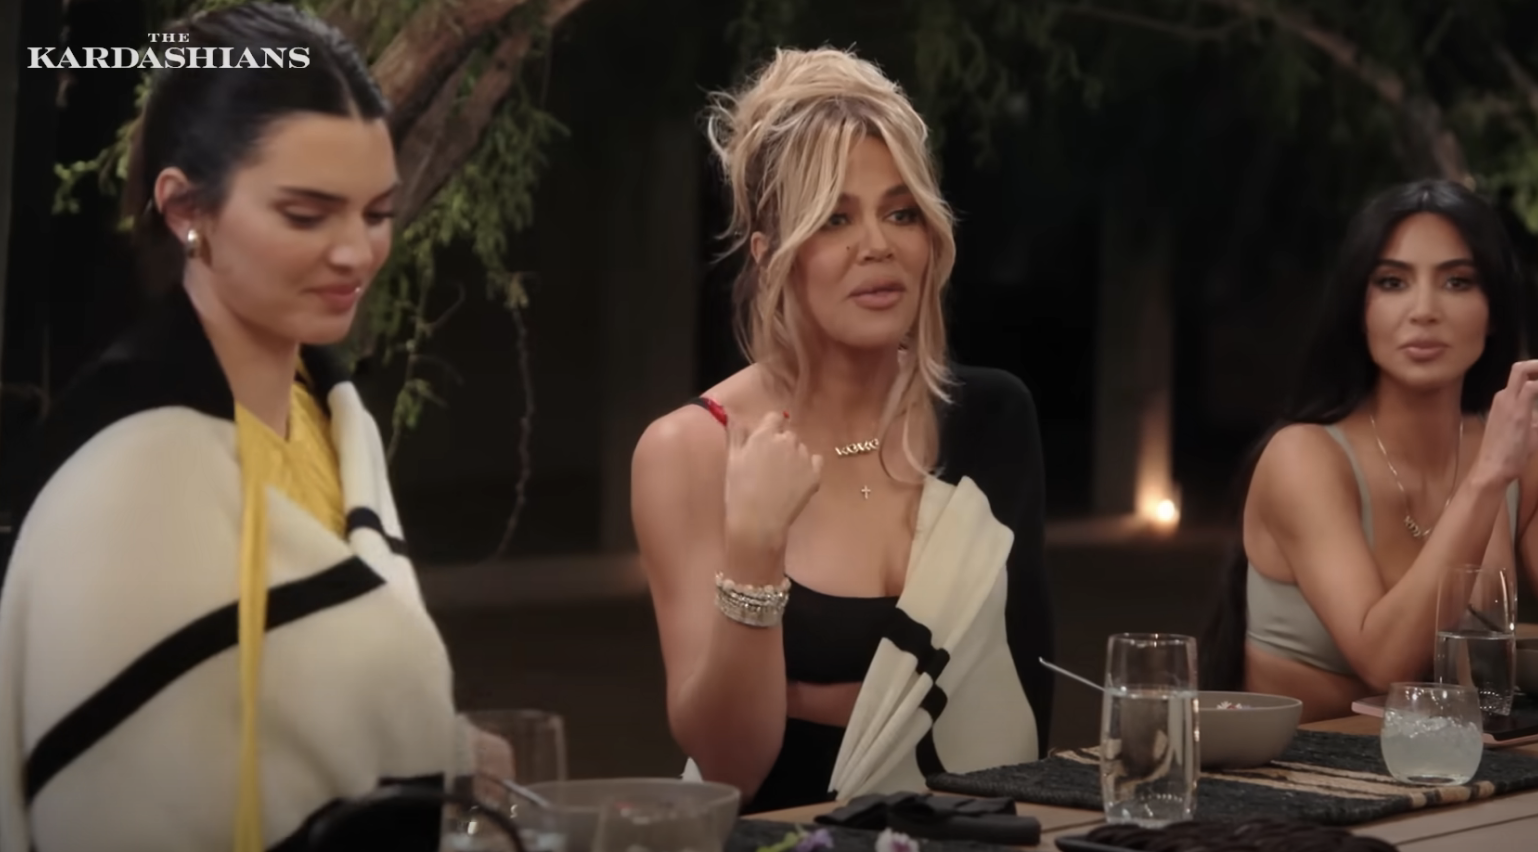 khloe sitting in between kendall and kim at dinner